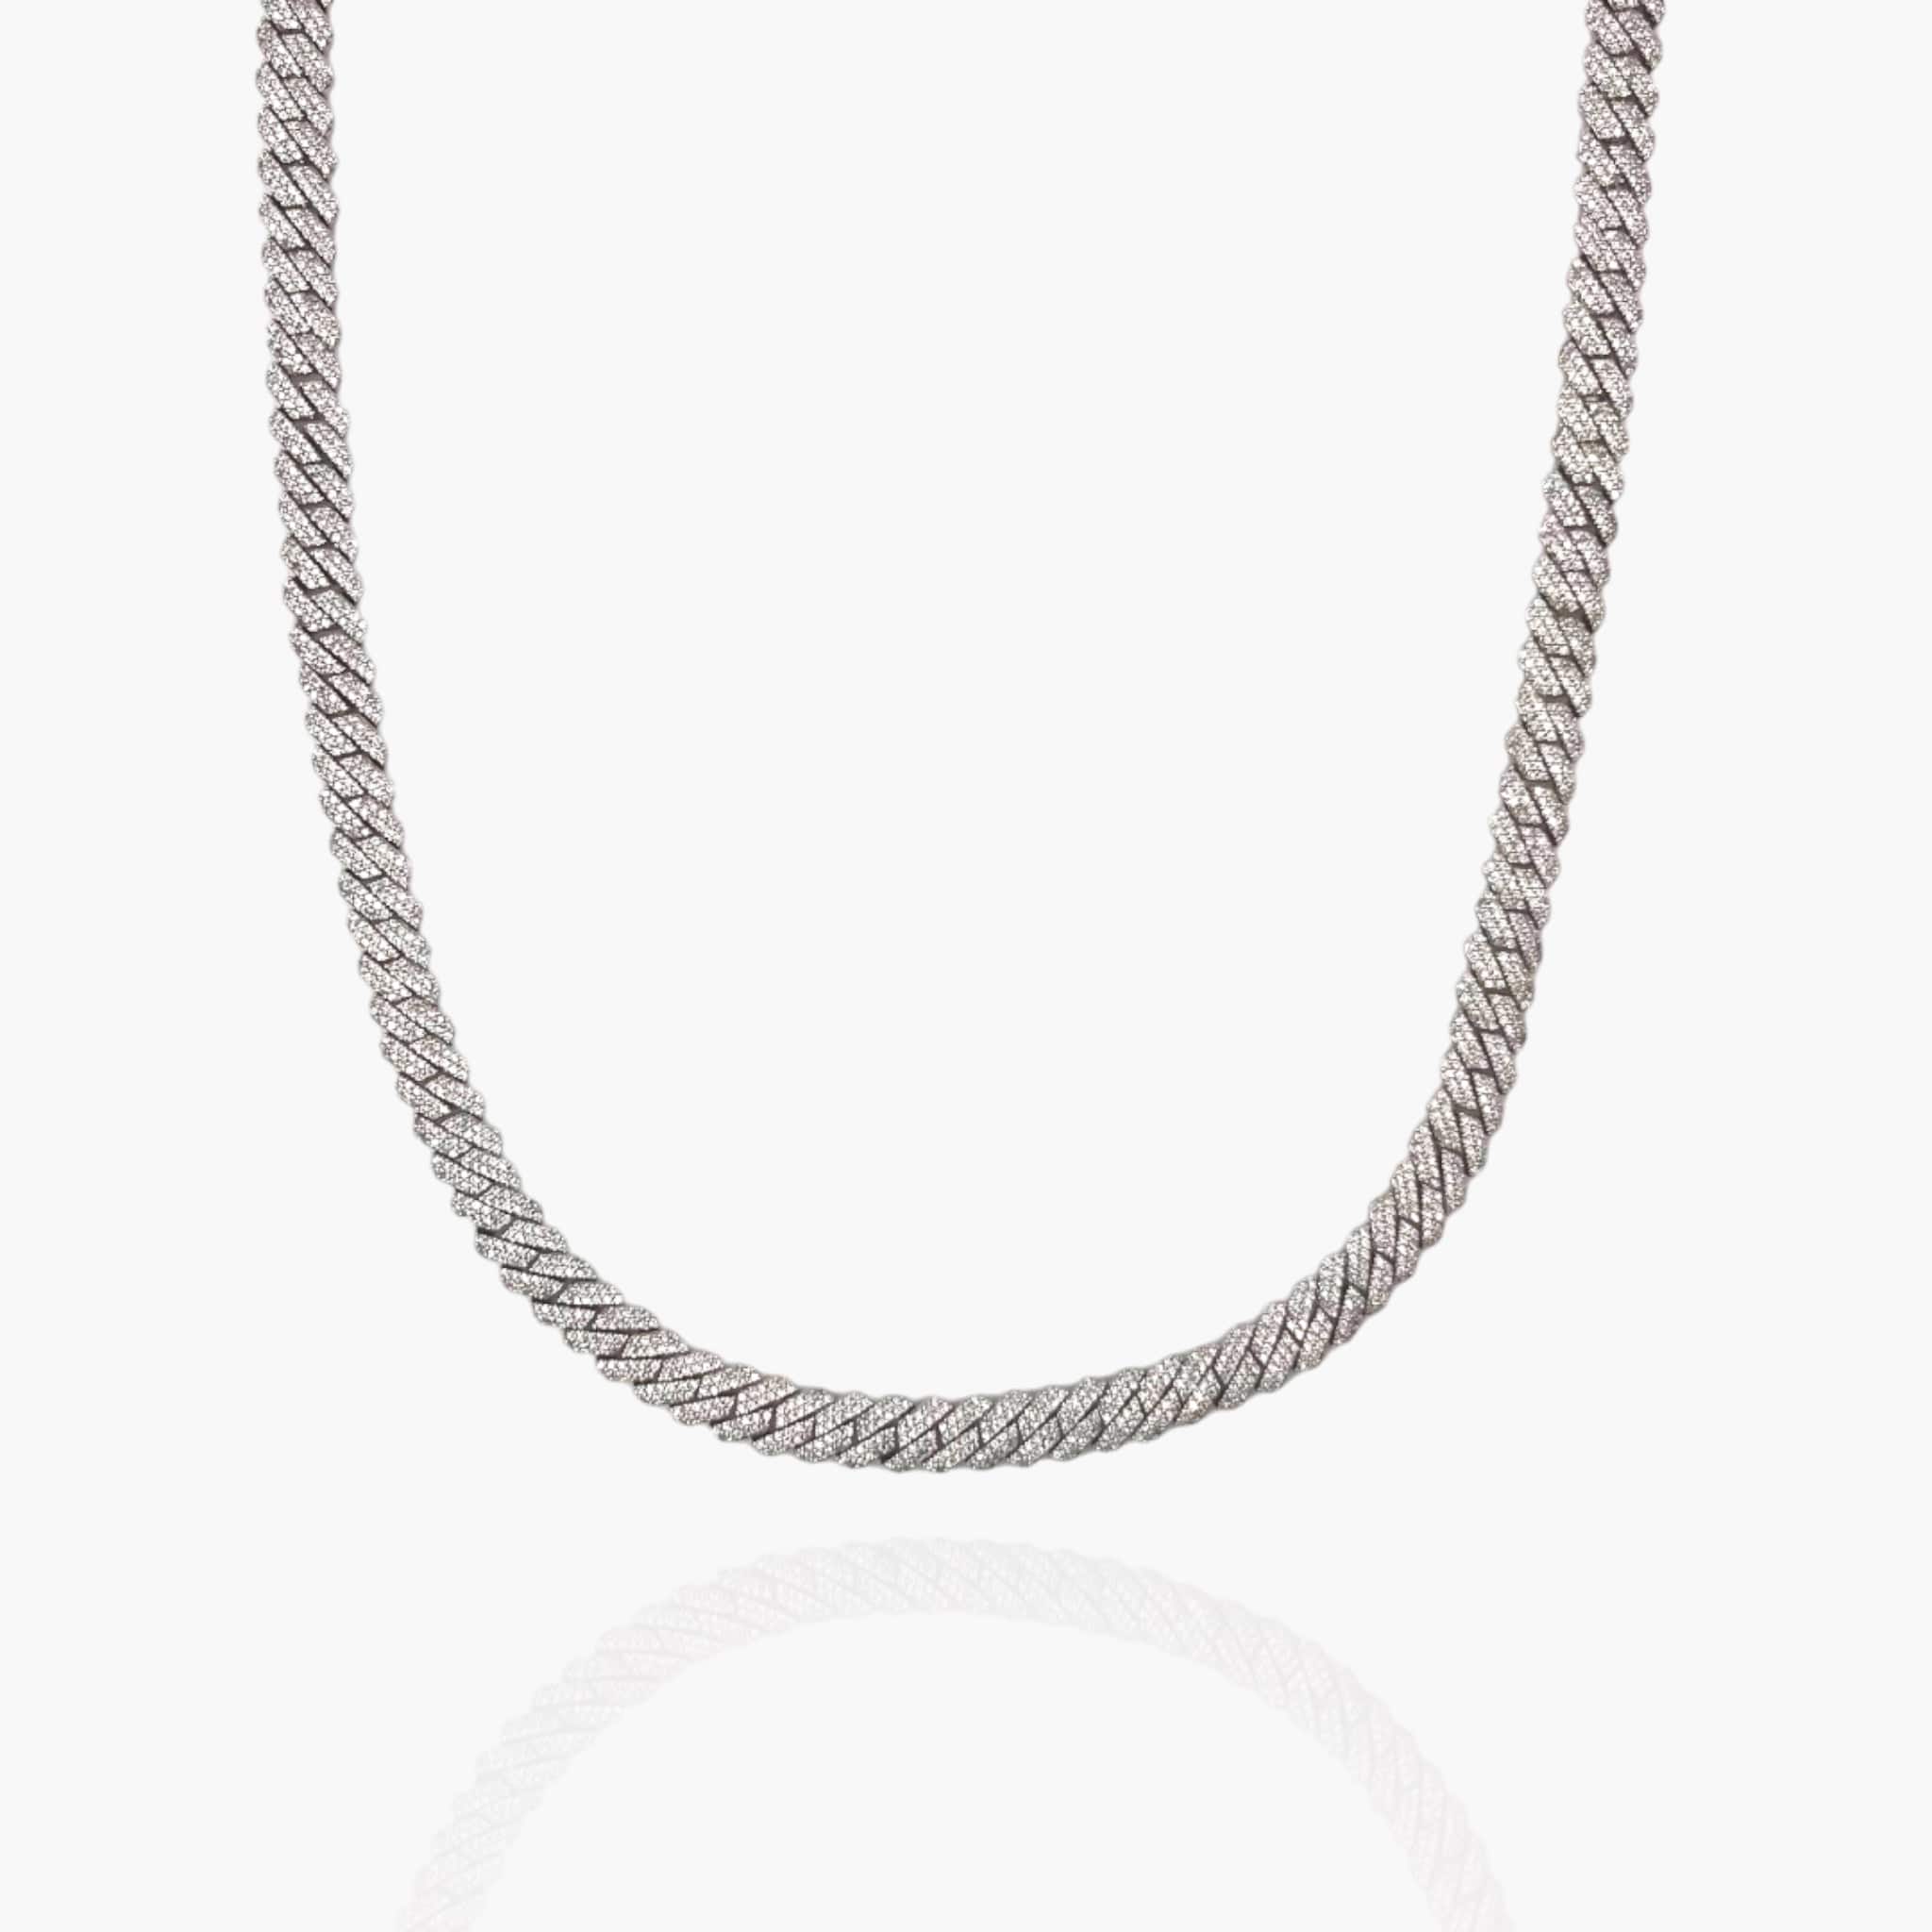 MANIQUE 8mm White Gold Prong Cuban Link Chain - Elegance Redefined